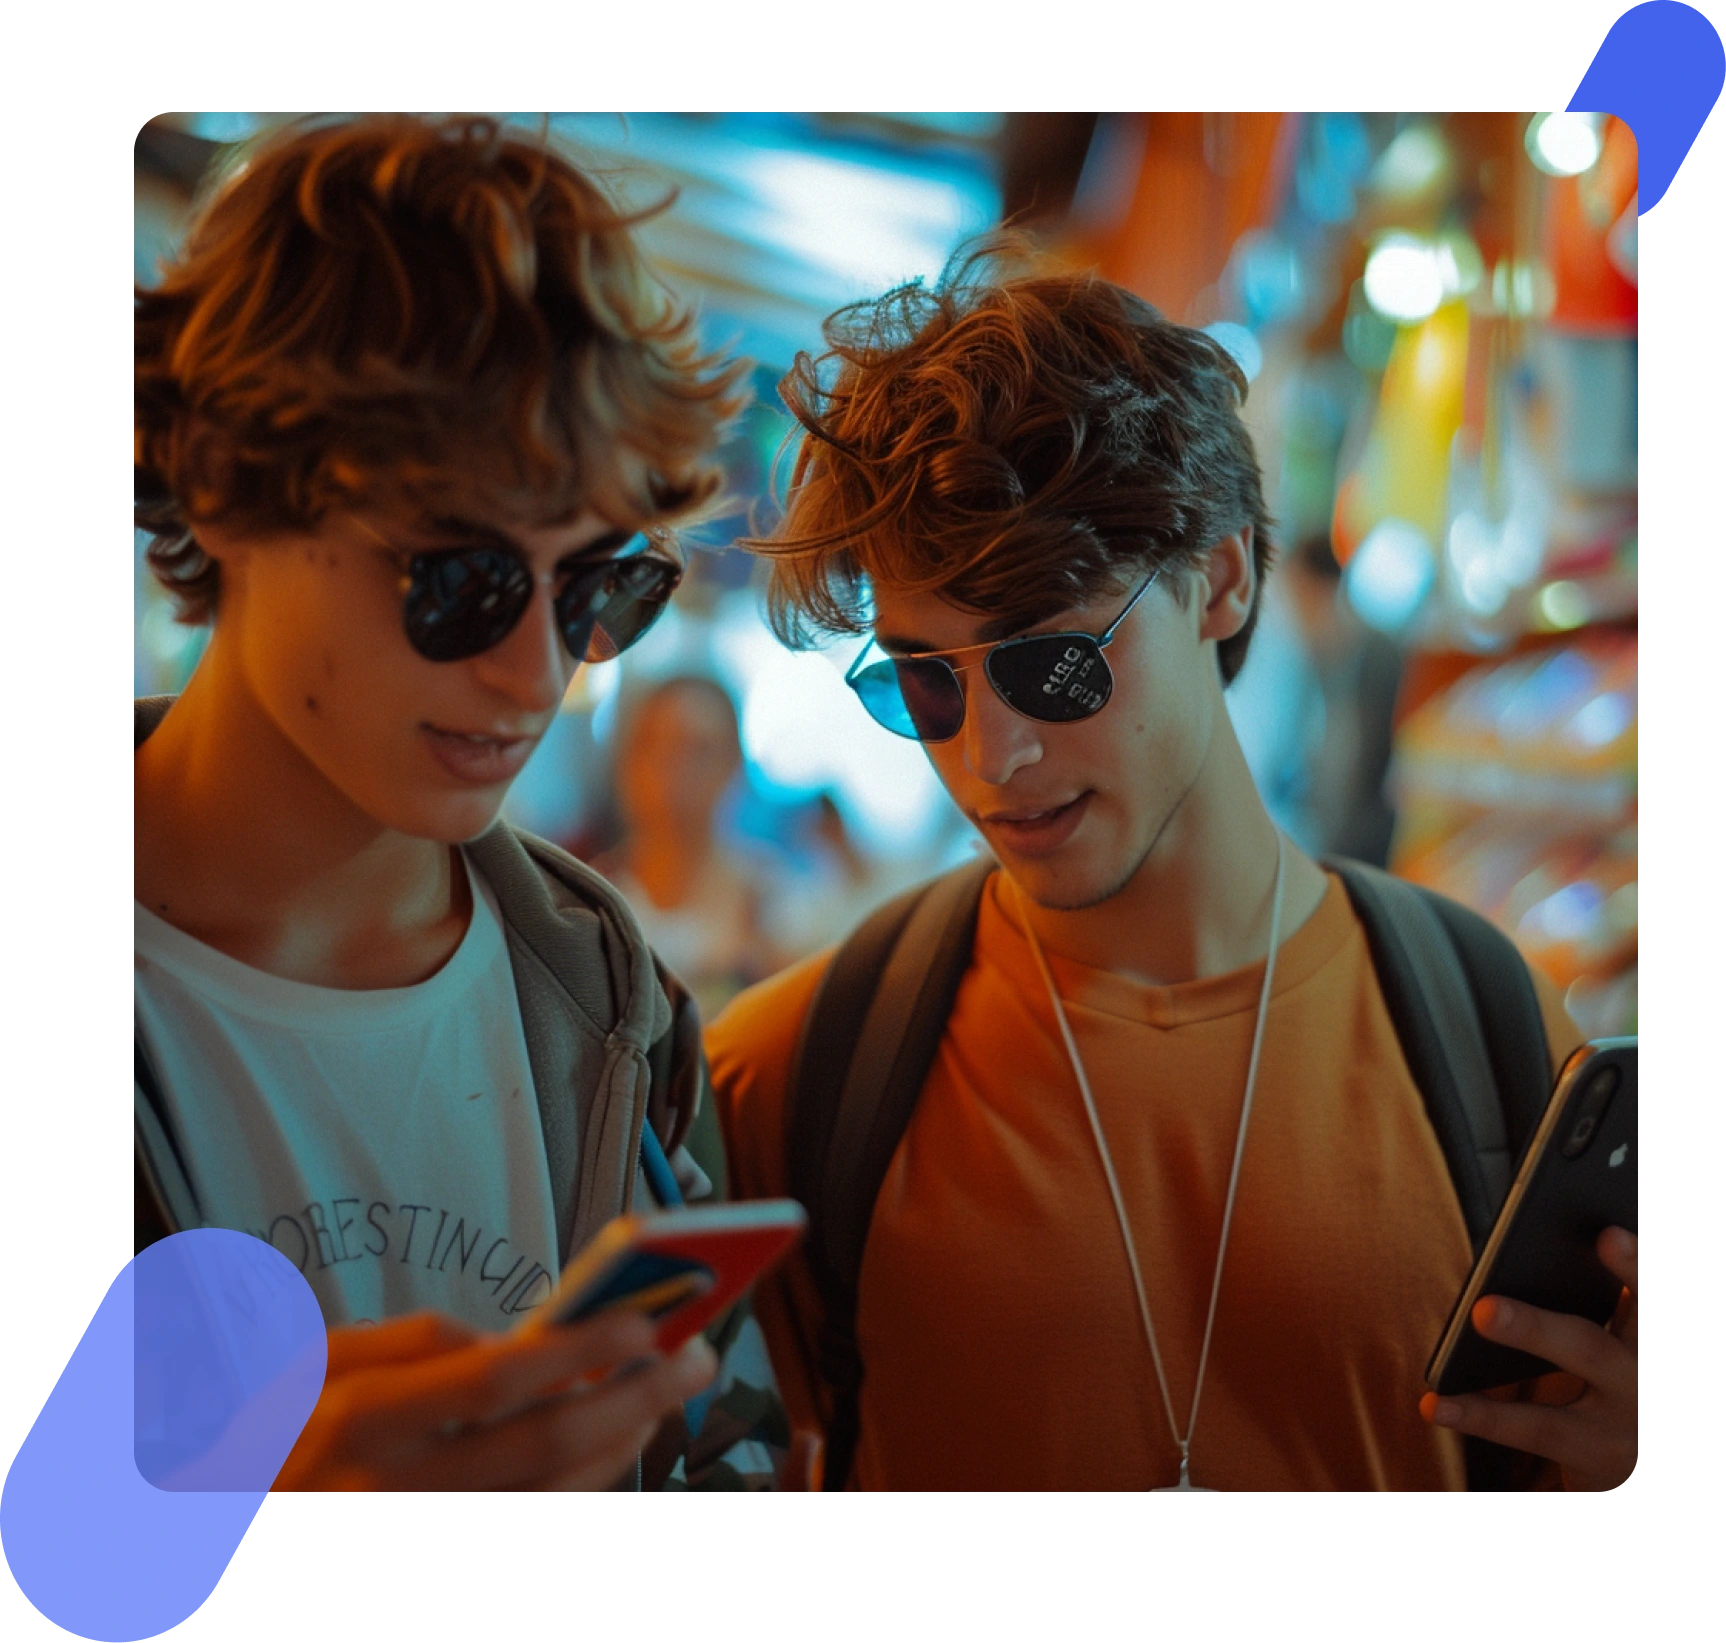 Image of two young individuals looking at a cellphone screen together, engaged in shared digital content or conversation.